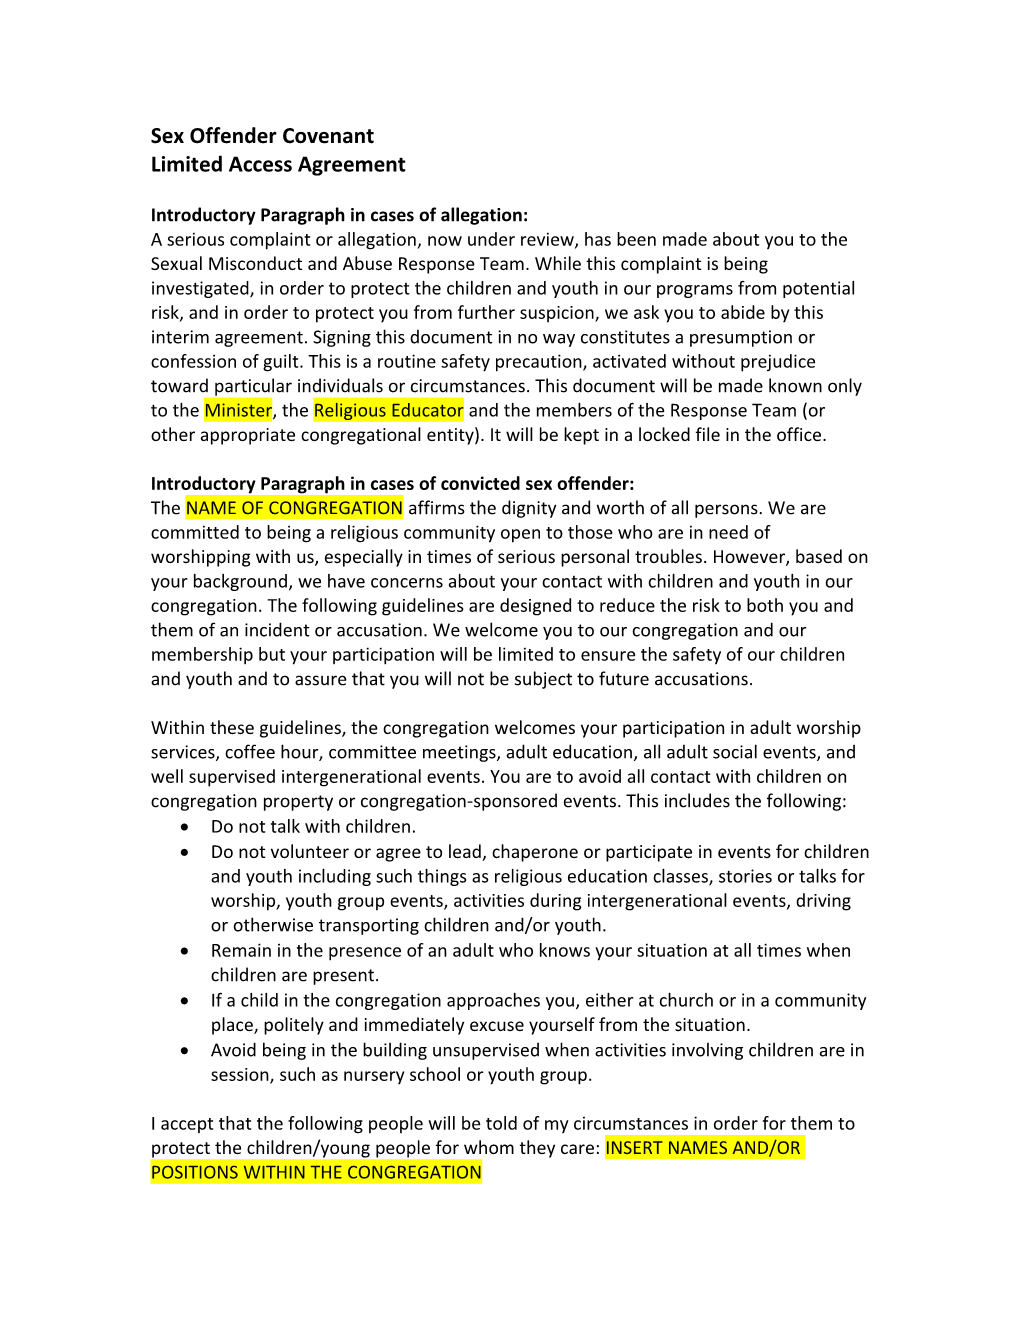 Draft Limited Access Agreement - Confidential